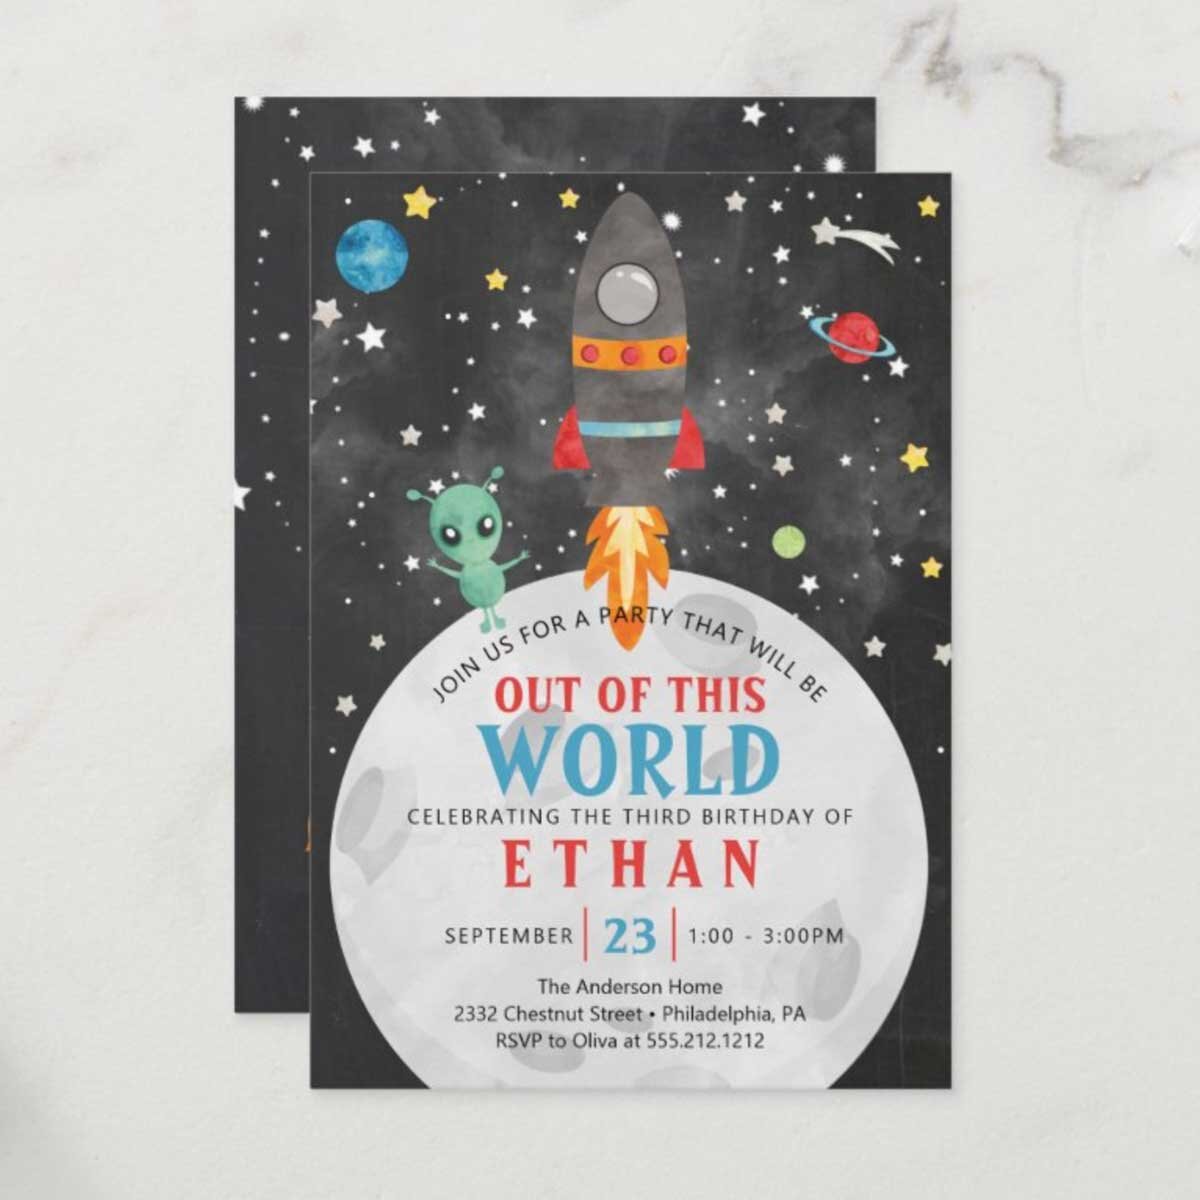 Out of this world birthday invitation